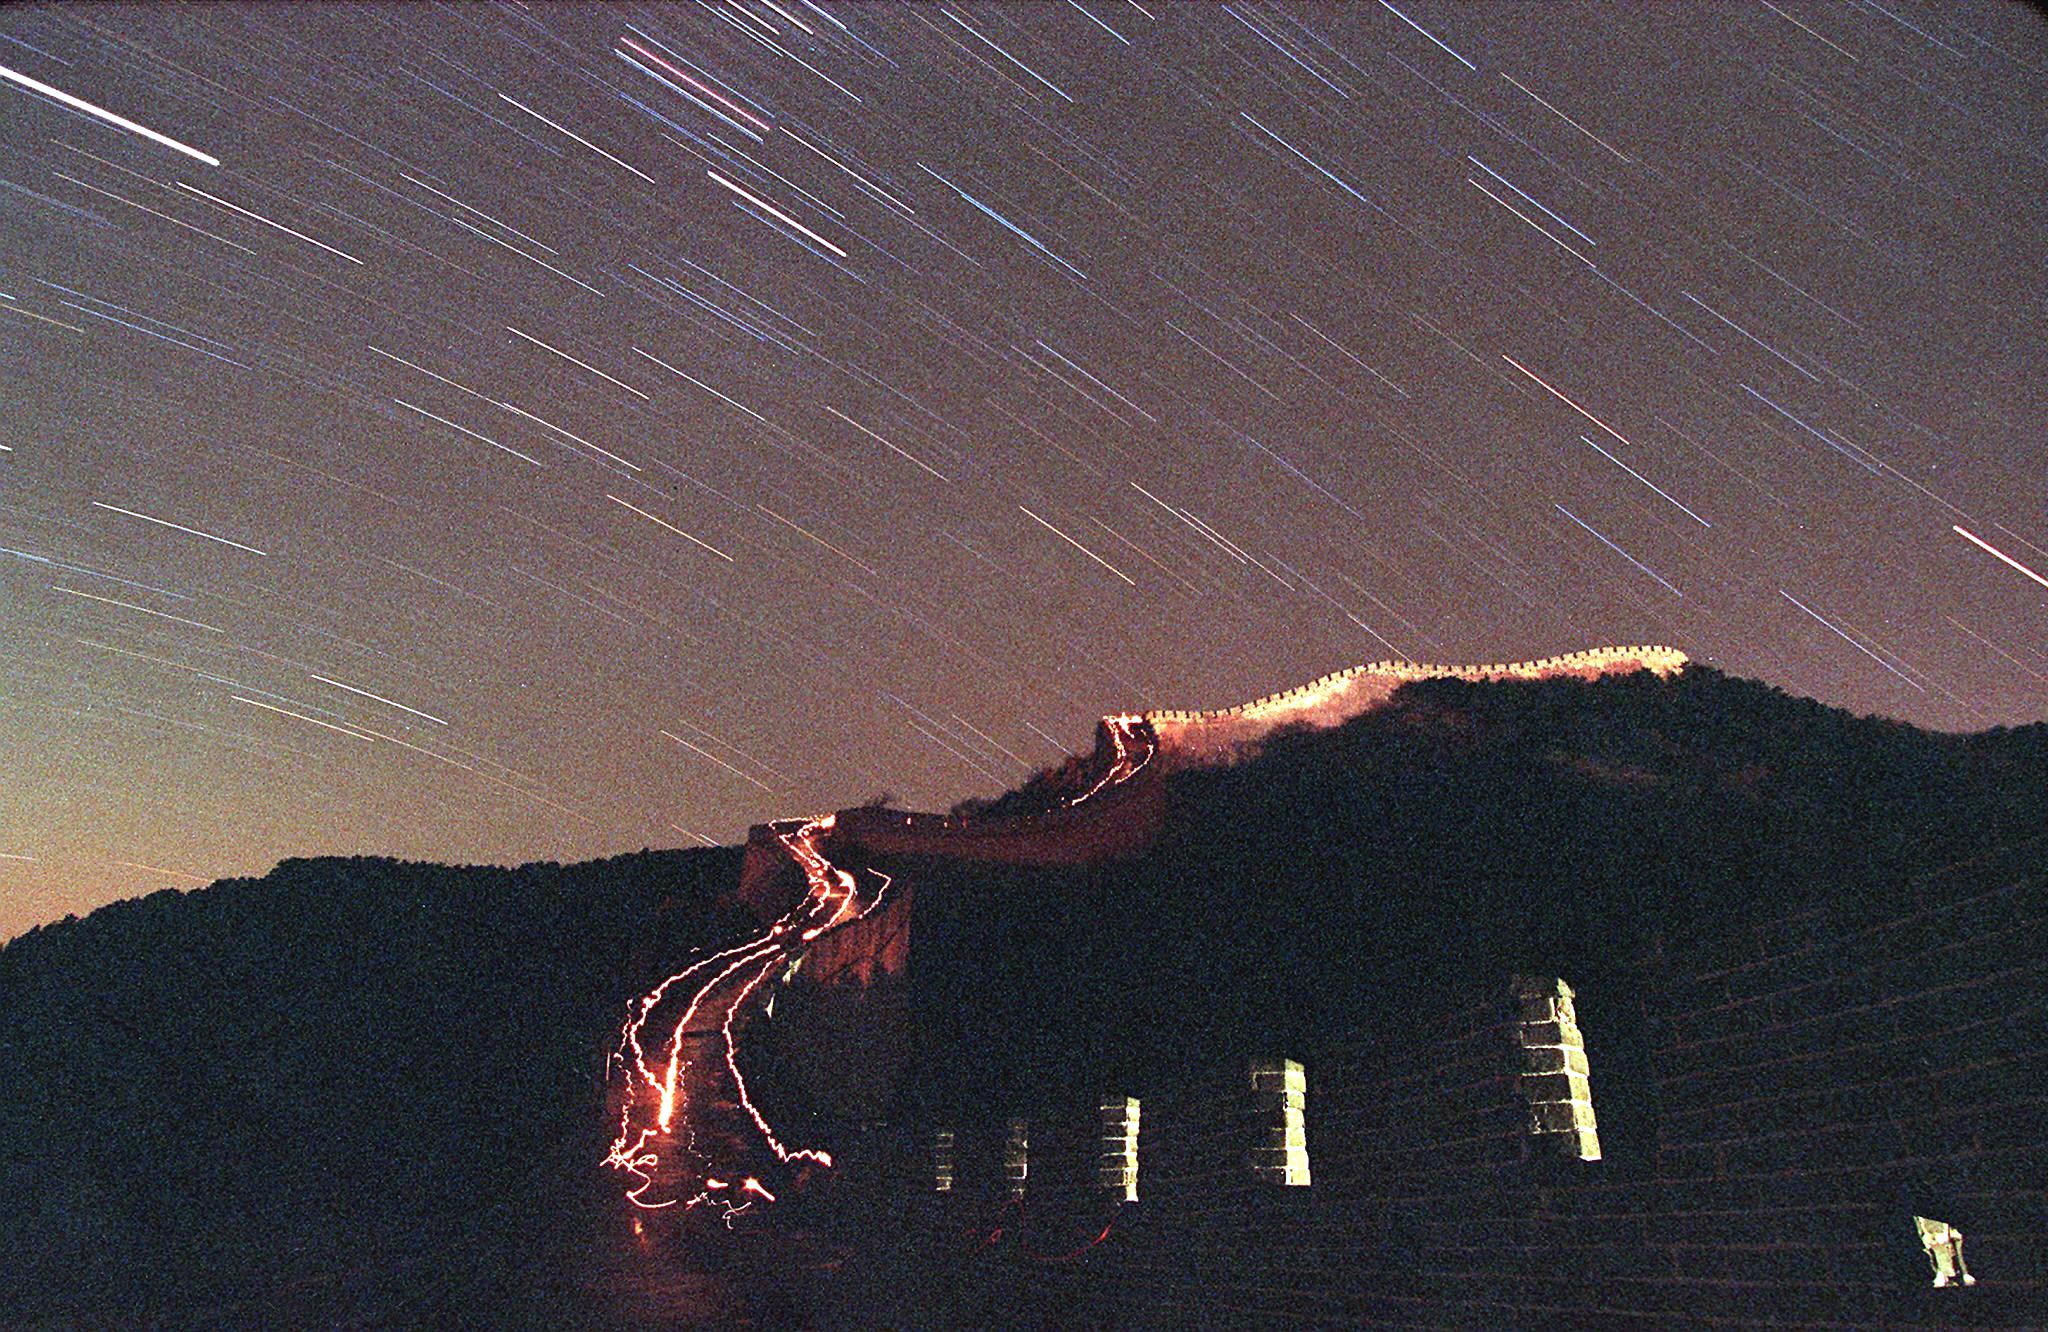 The Leonid meteor shower lights up the sky above China's Great Wall (STEPHEN SHAVER&mdash;AFP/Getty Images)